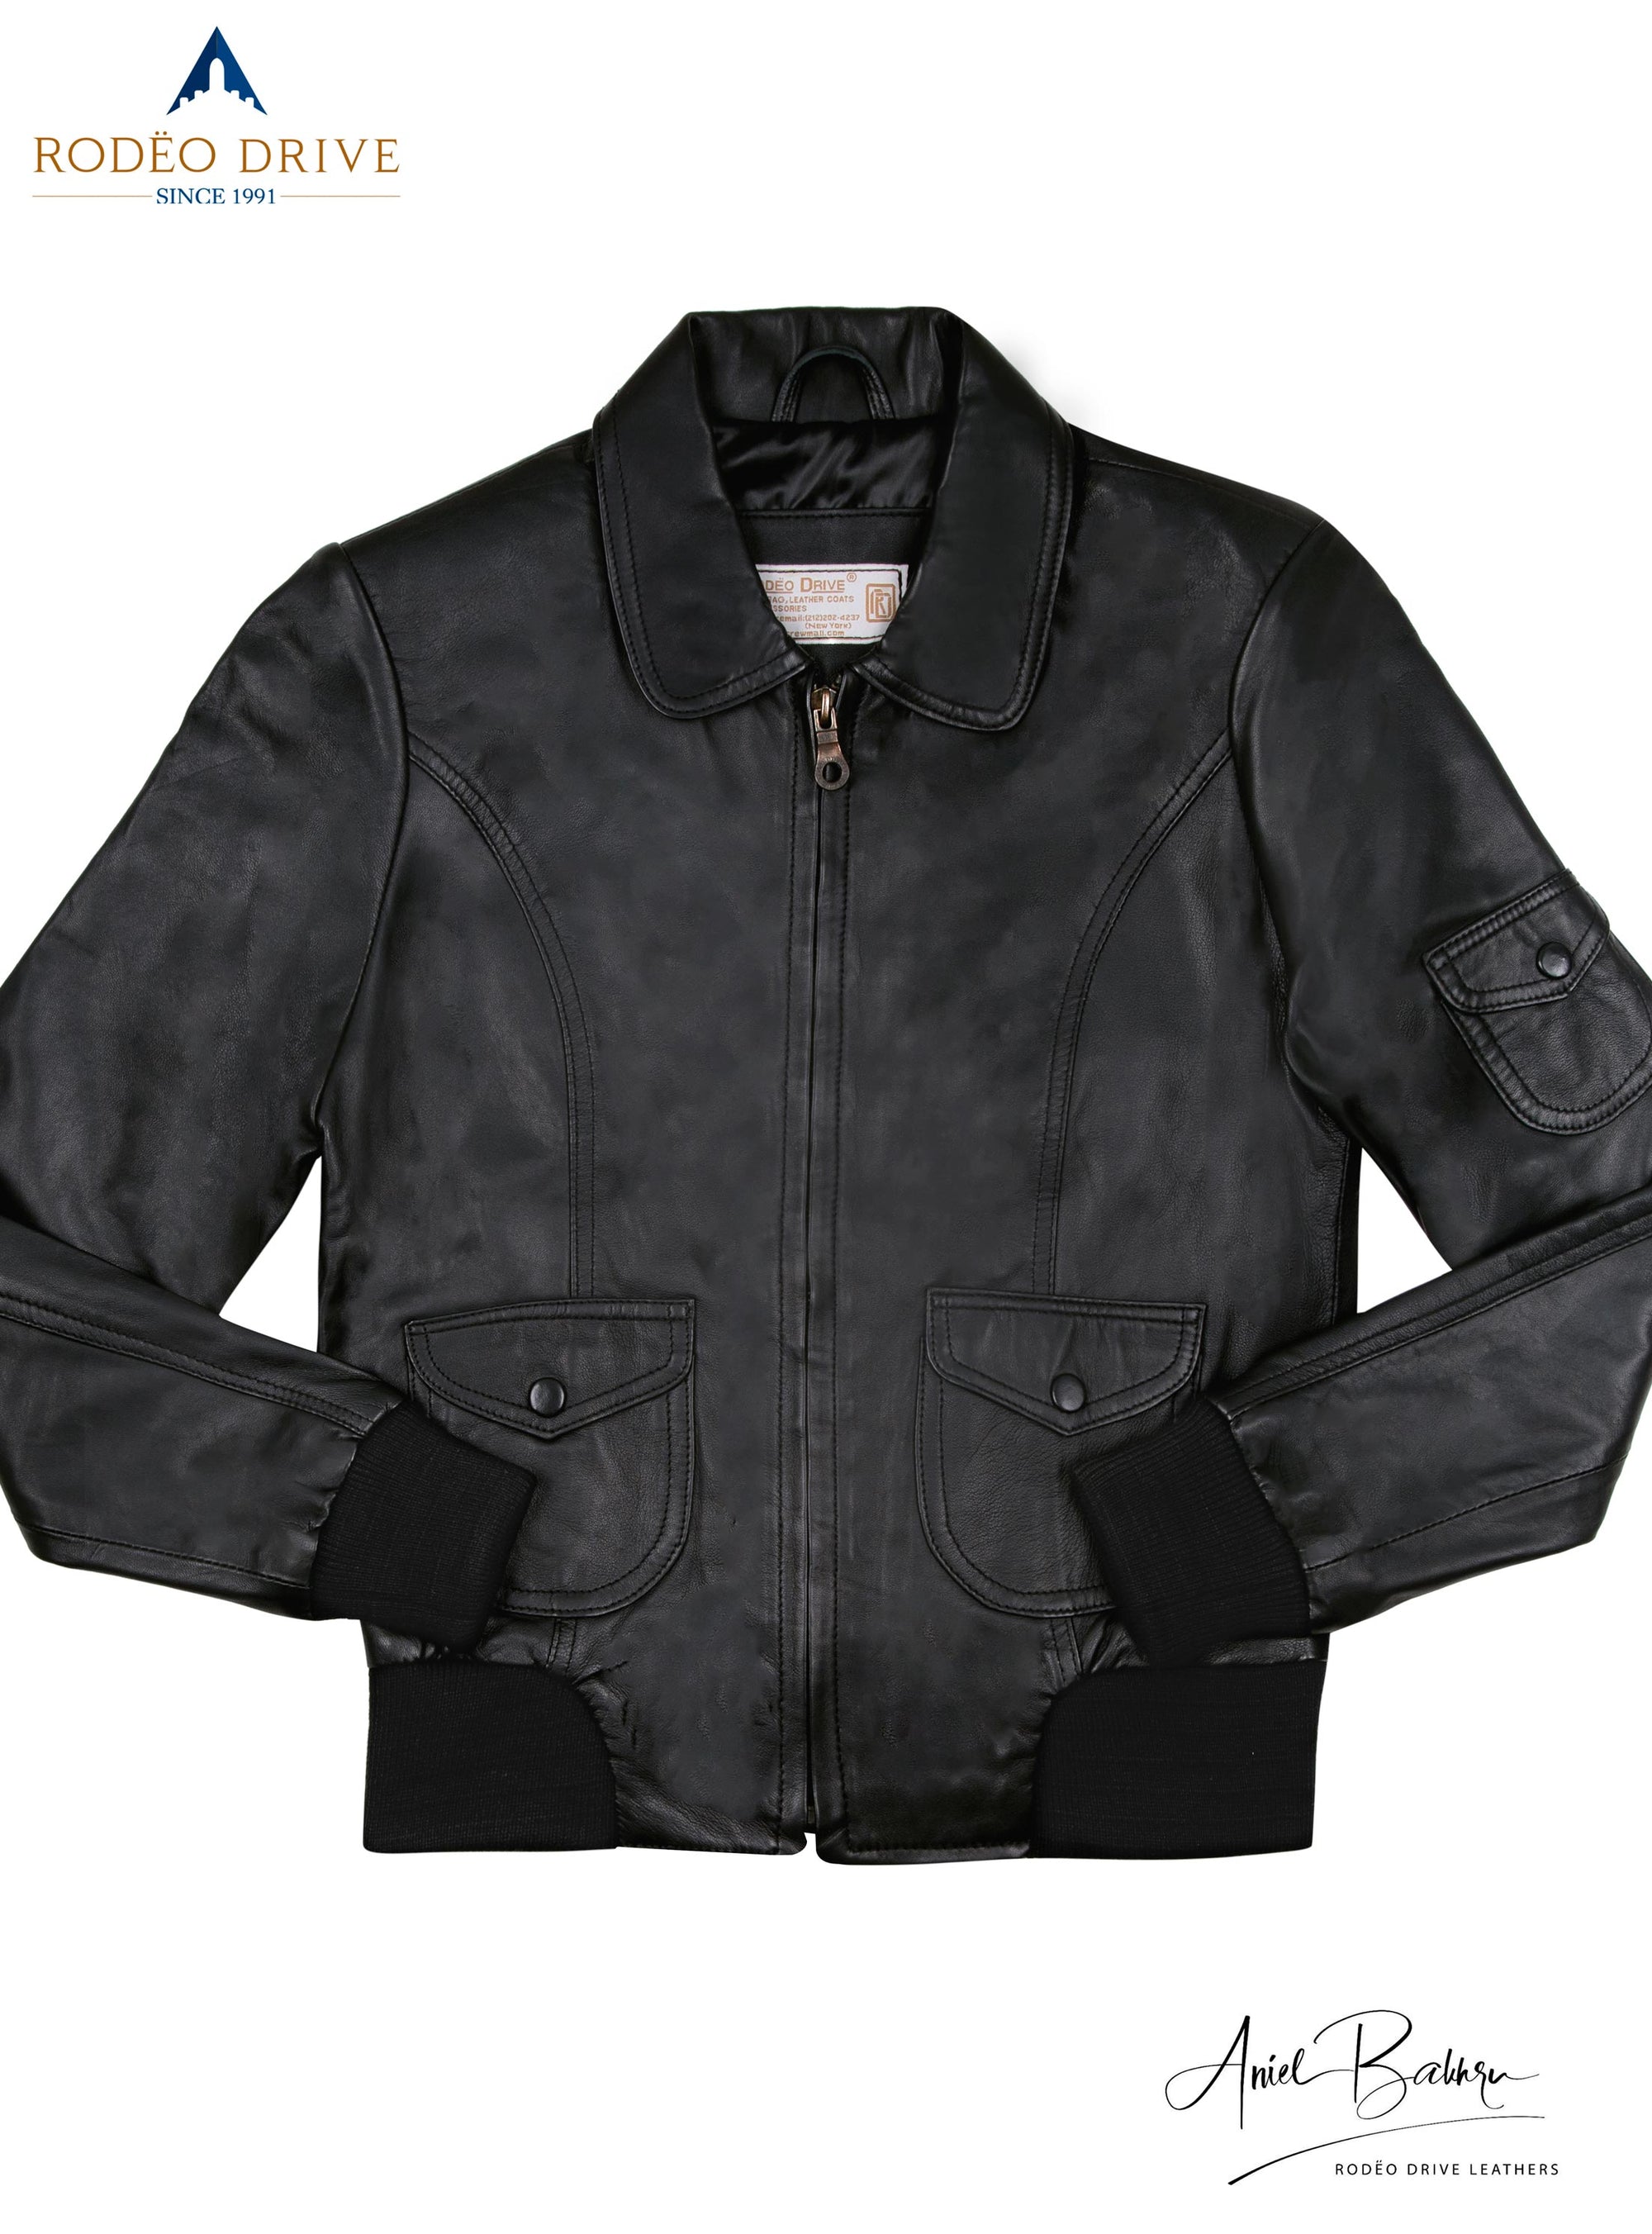 Womens bomber jacket - with perfect fitting -full sleeves and pockets 